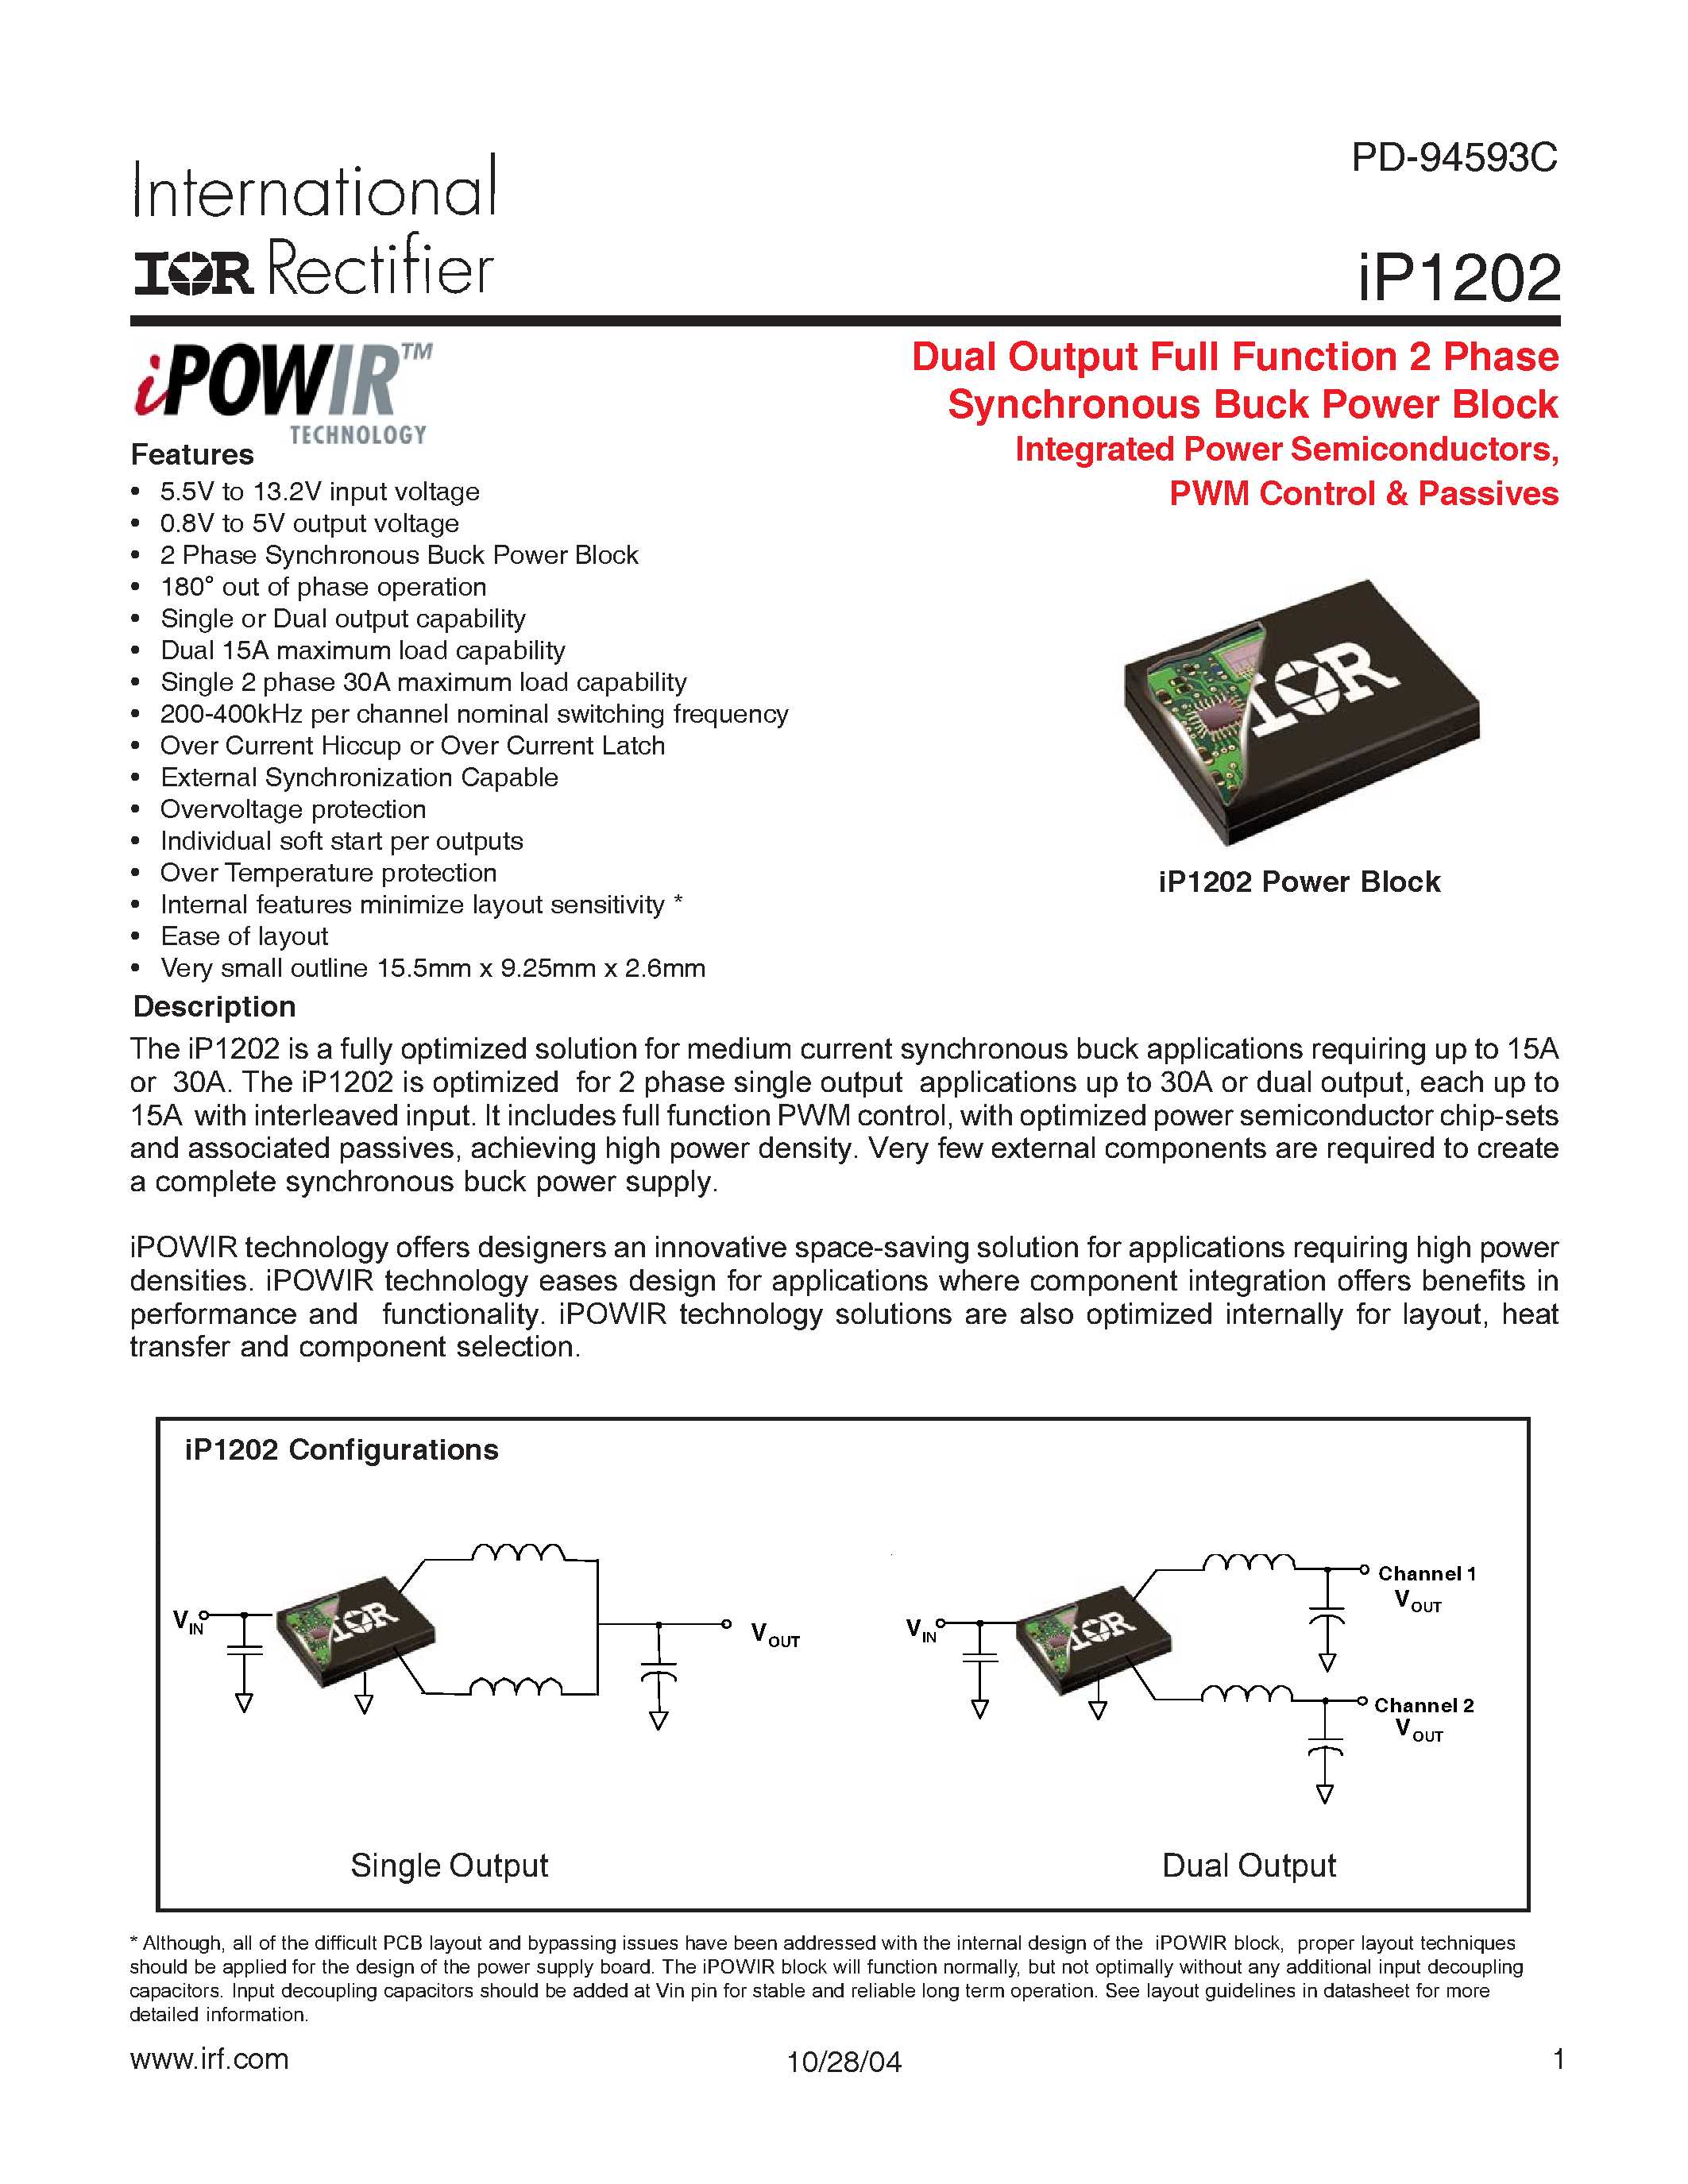 Datasheet IP1202 - Dual Output Full Function 2 Phase Synchronous Buck Power Block Integrated Power Semiconductors/ PWM Control & Passives page 1